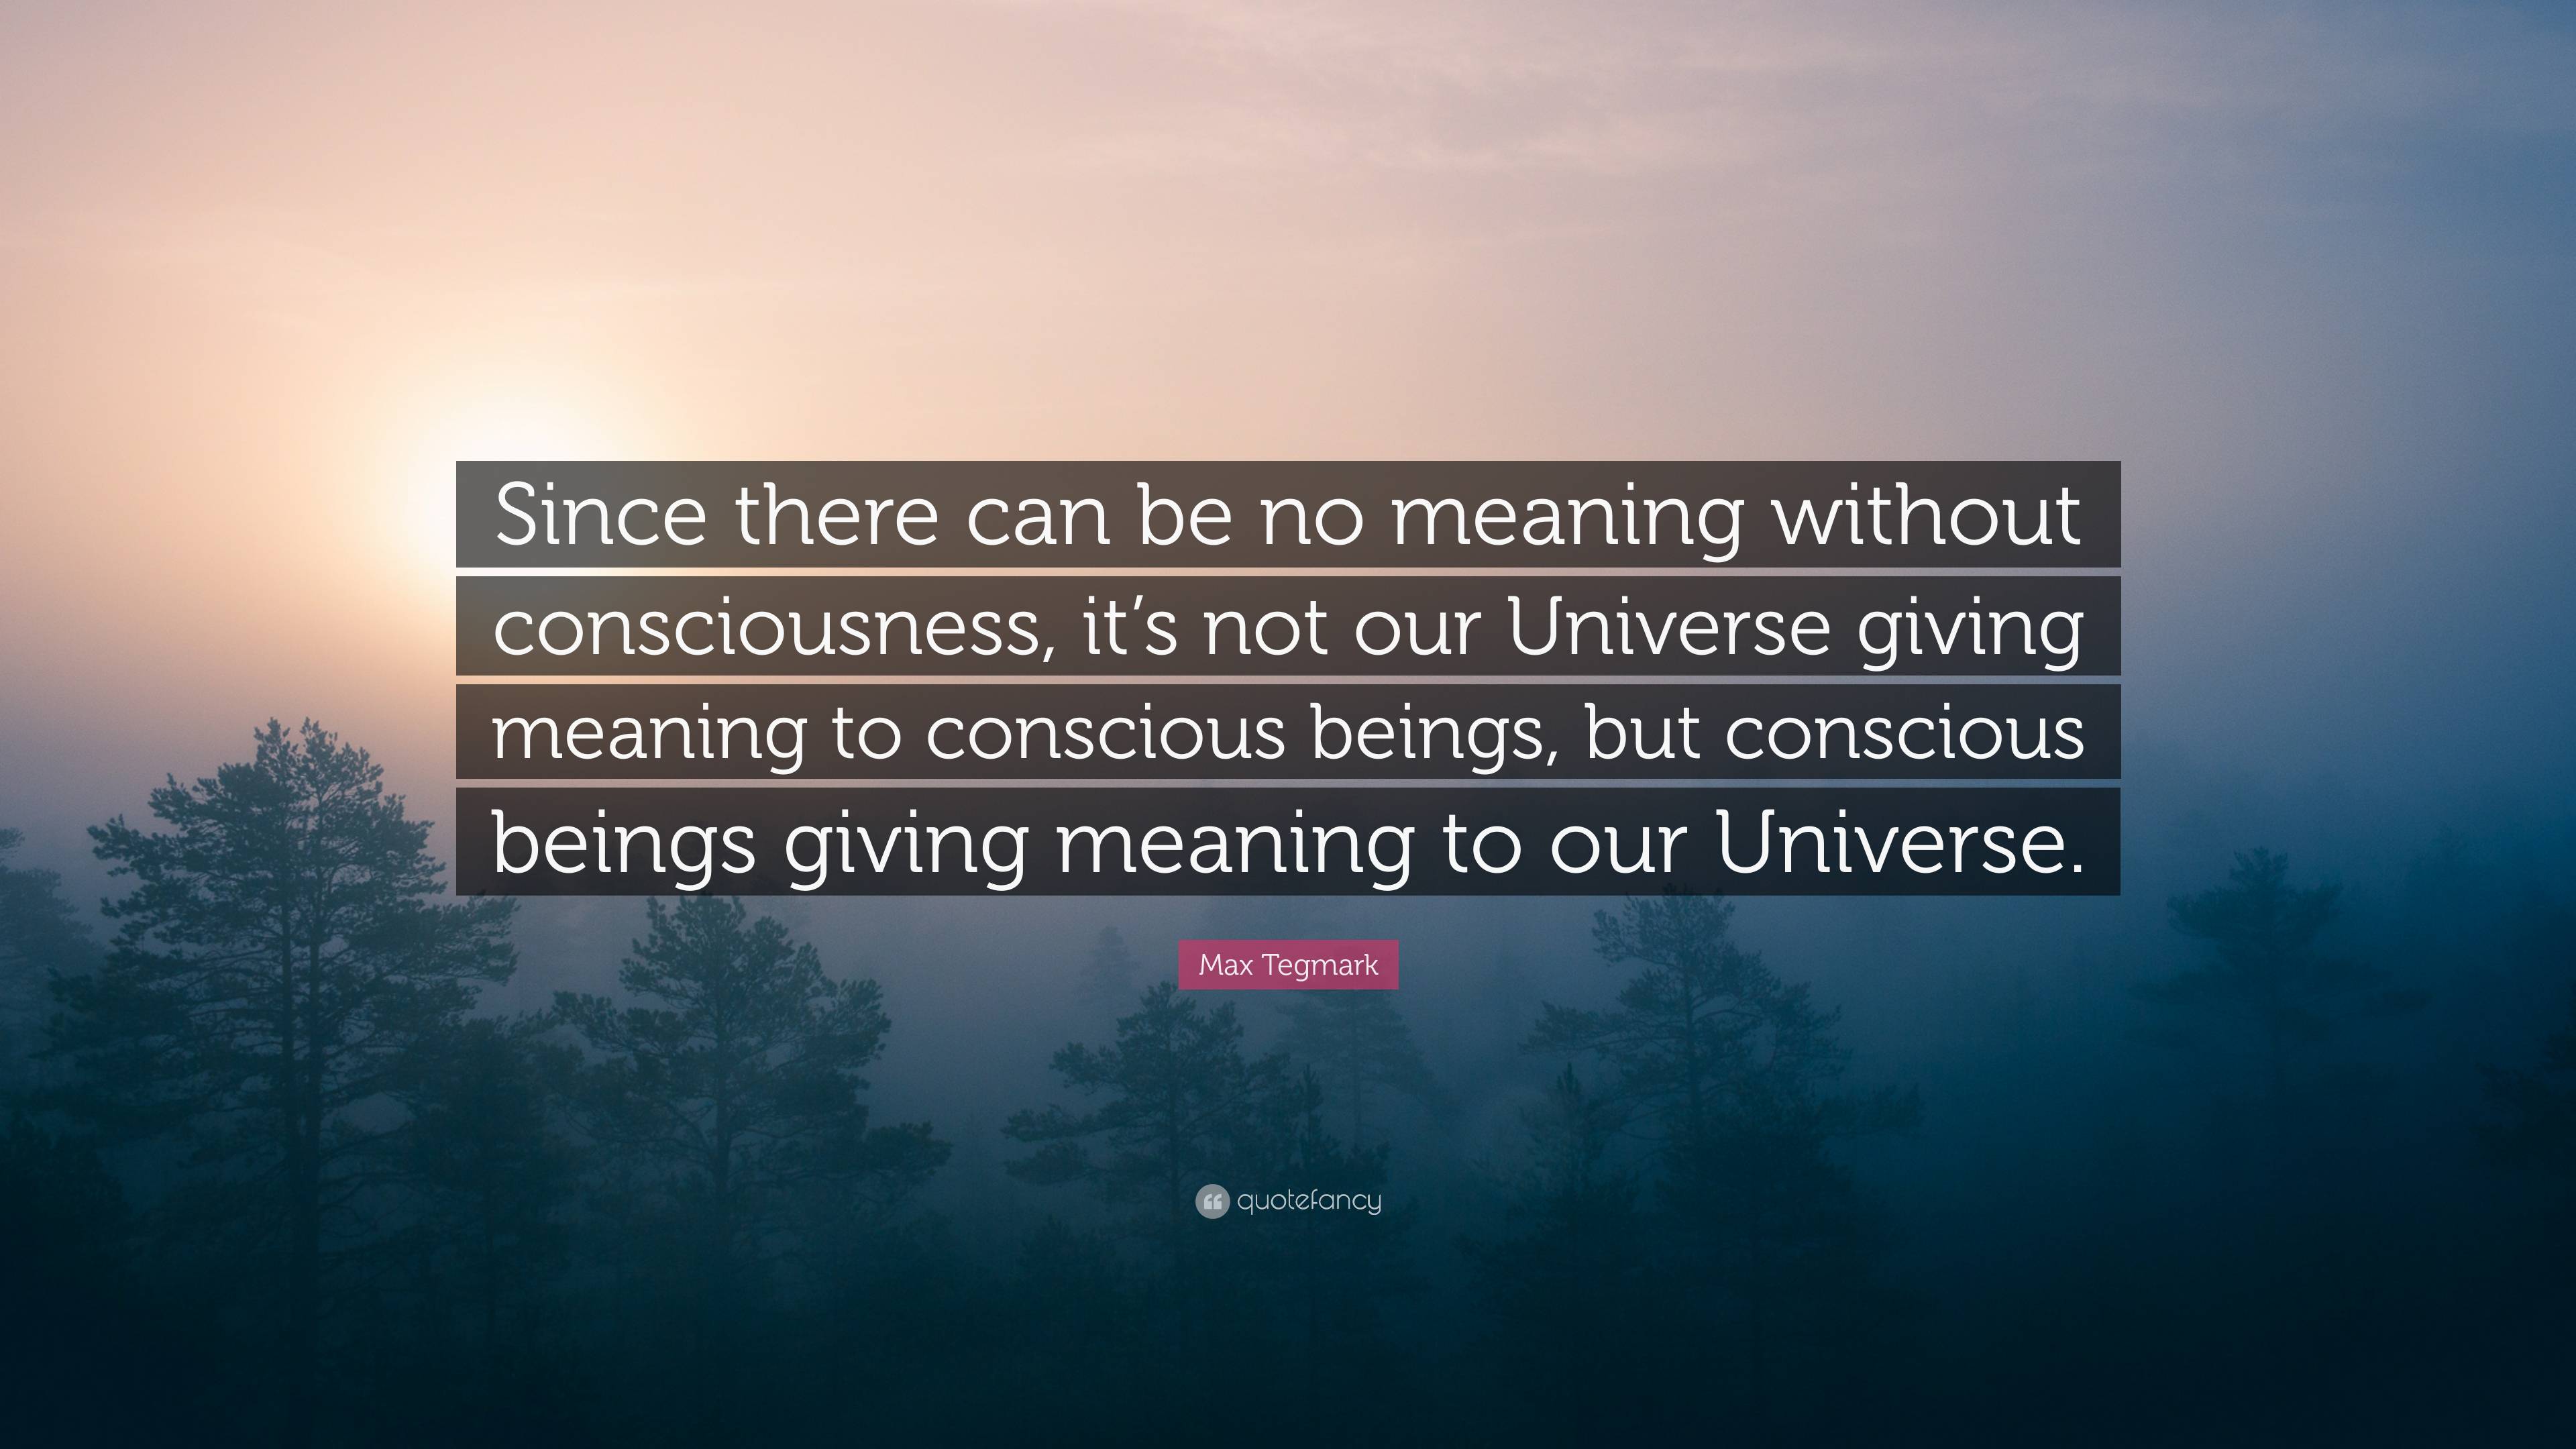 Max Tegmark Quote: “Since there can be no meaning without consciousness ...